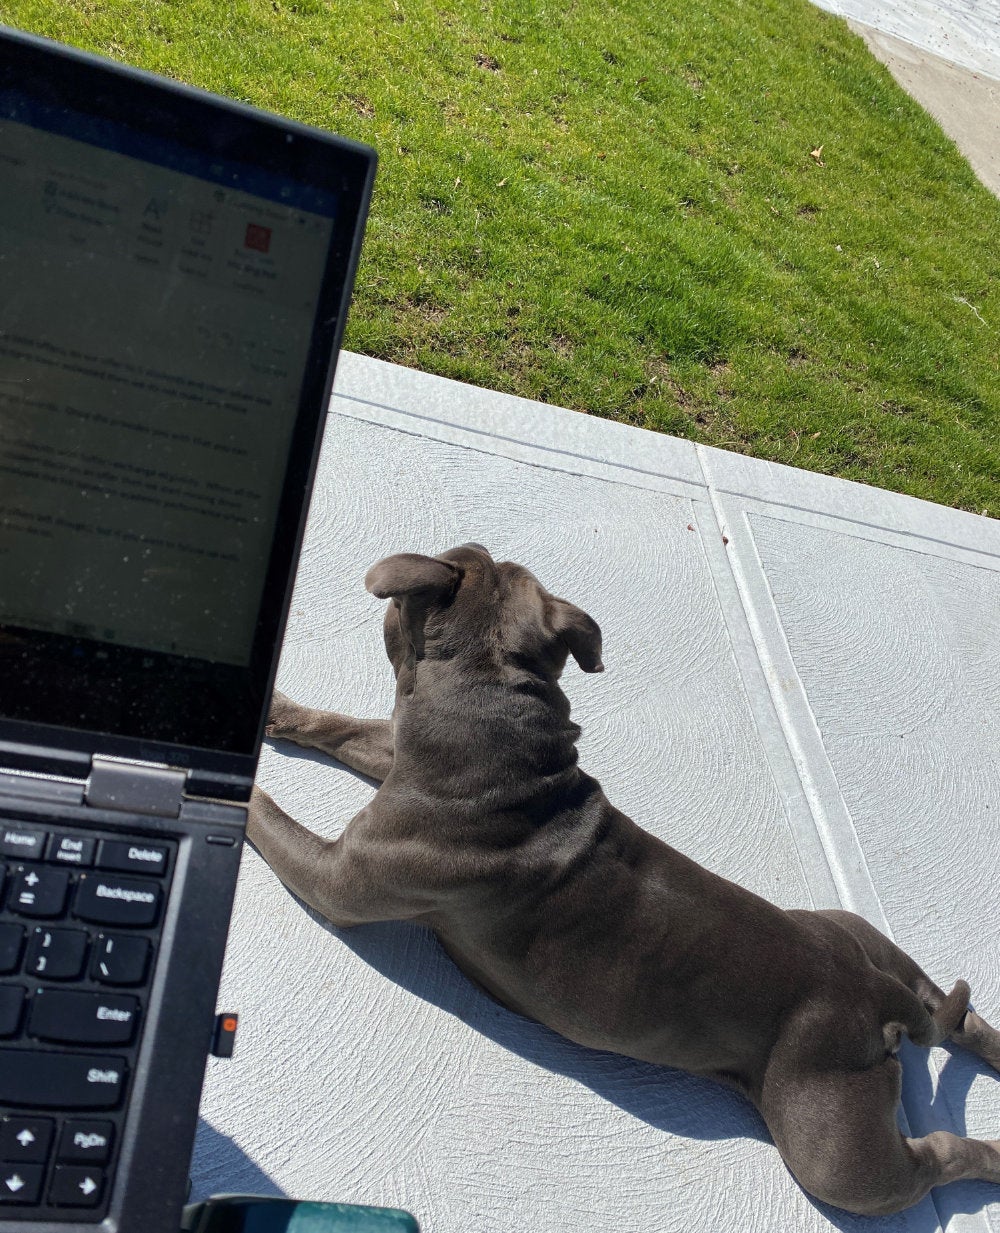 A dog laying on a sidewalk with a computer in the foreground